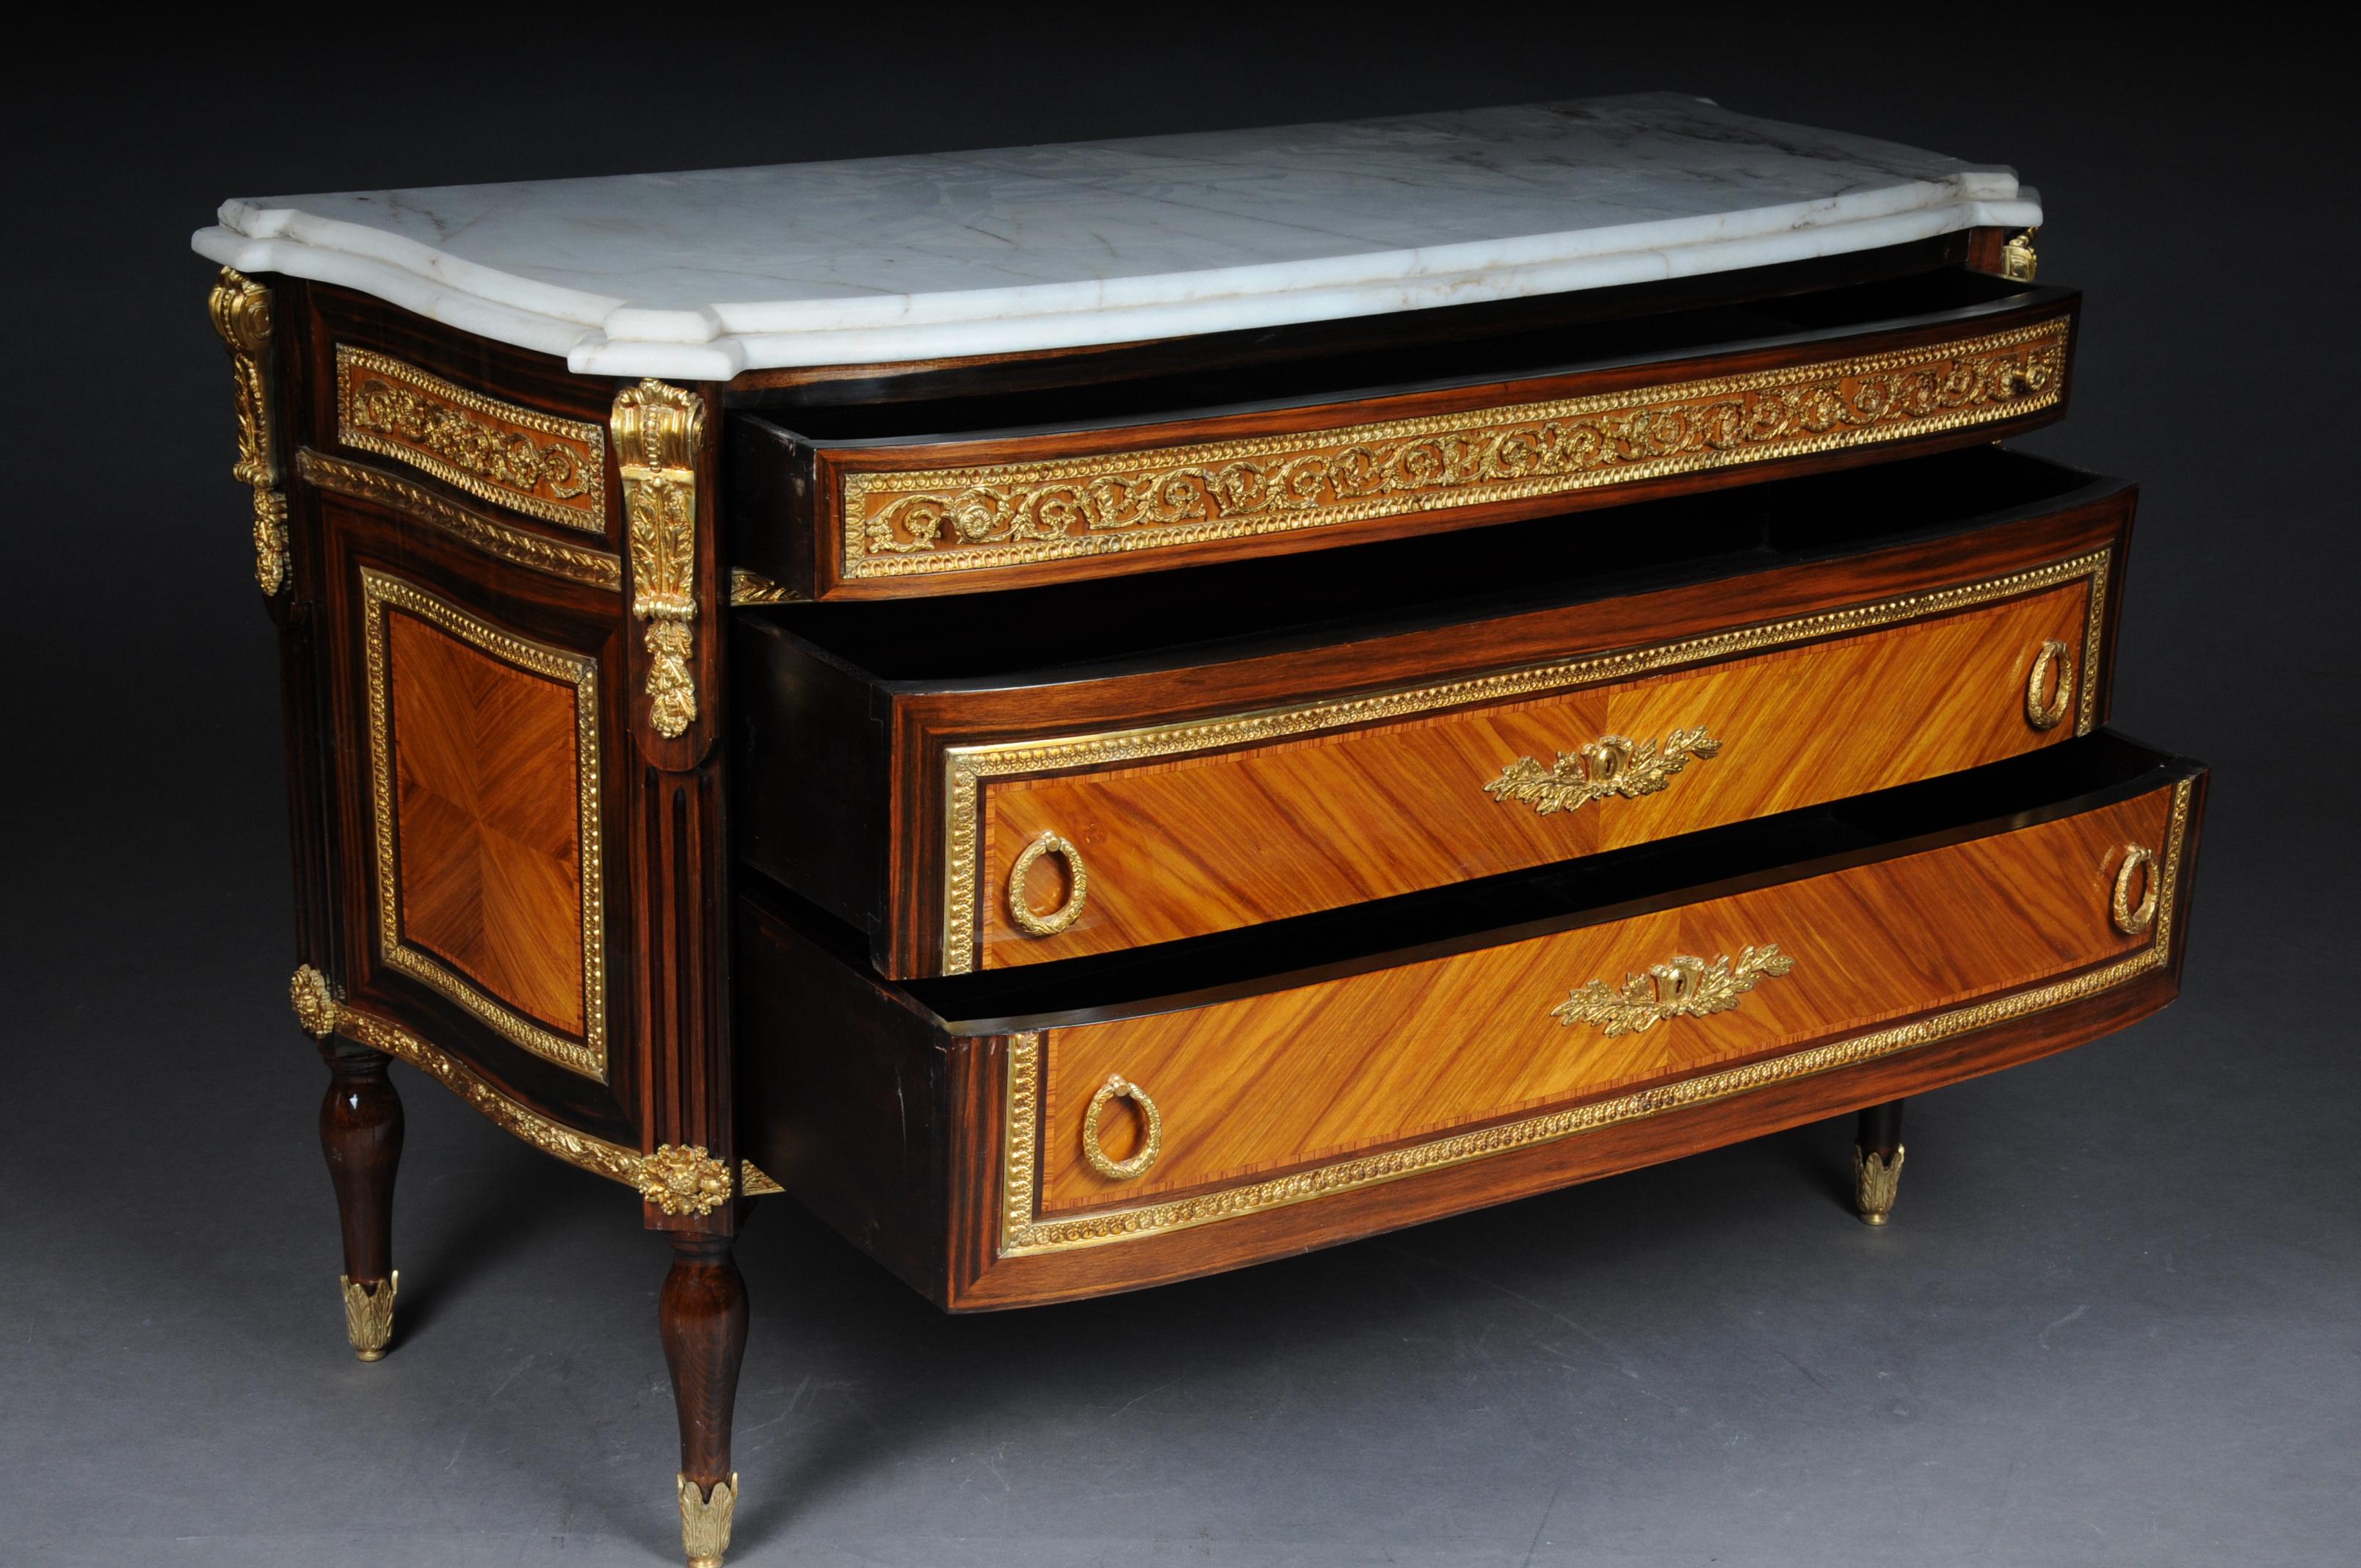 Impressive Chest of Drawers Sideboard in Louis XVI In Good Condition For Sale In Berlin, DE